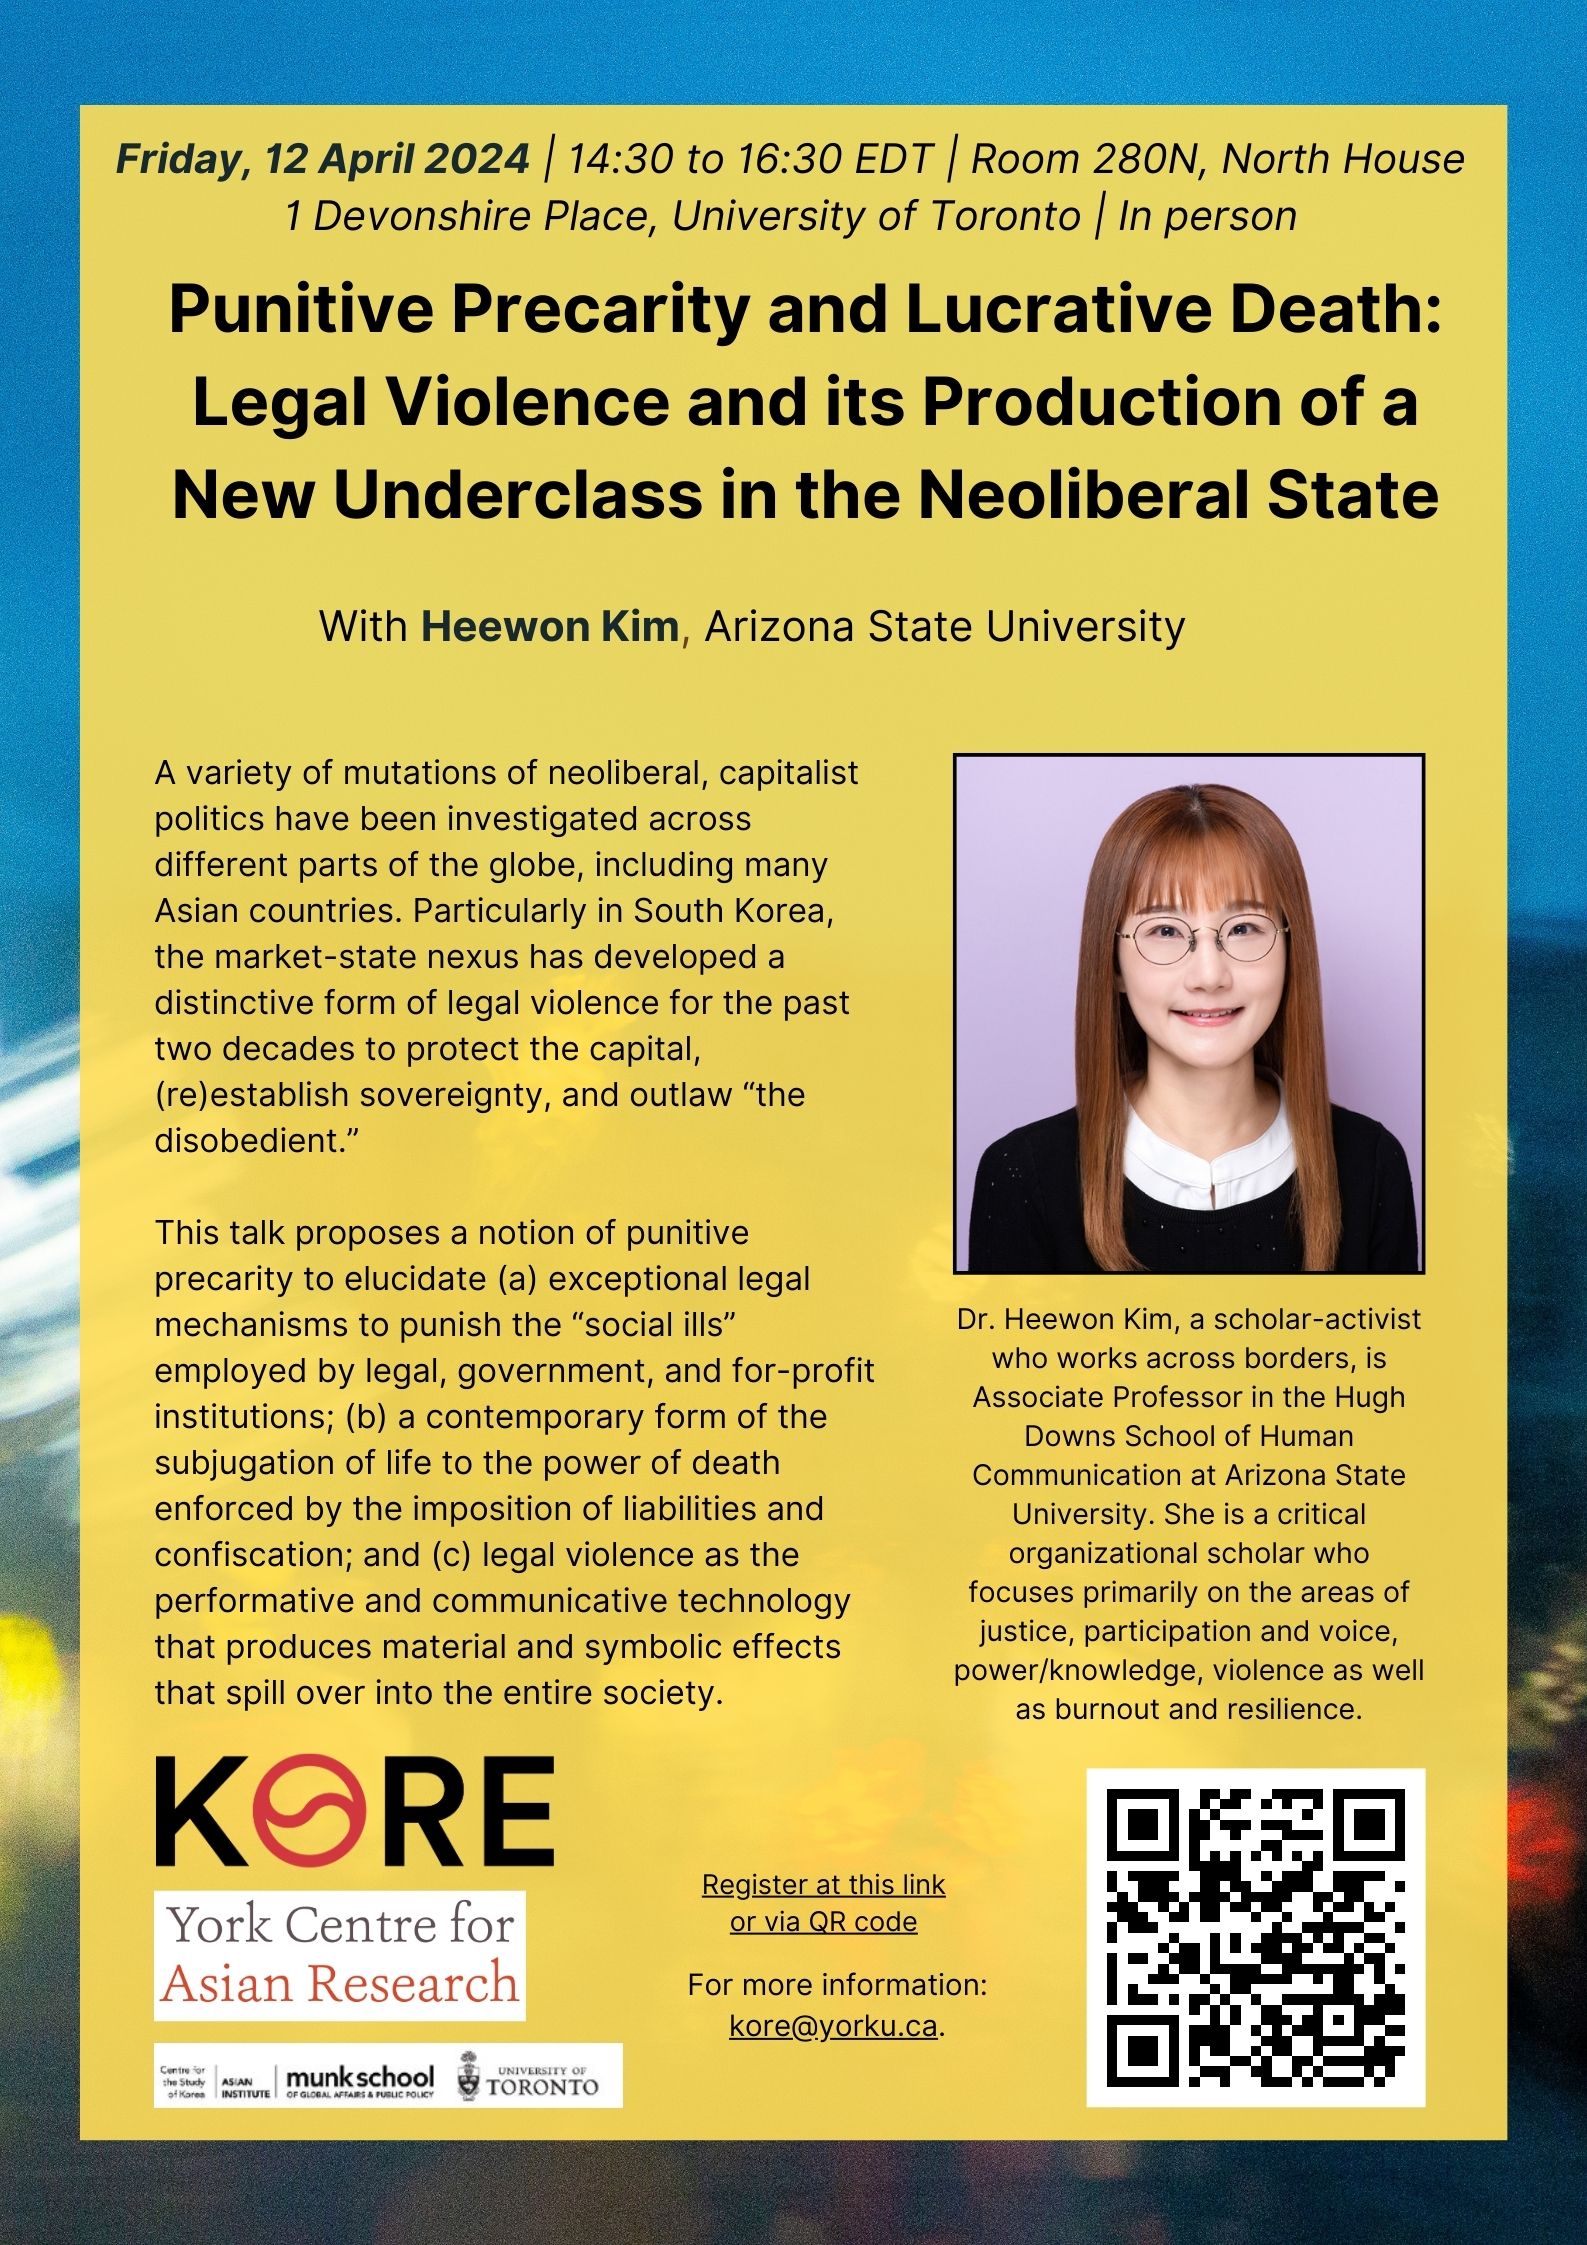 Punitive Precarity and Lucrative Death: Legal Violence and its Production of a New Underclass in the Neoliberal State @ Room 280N, North House, 1 Devonshire Place, University of Toronto